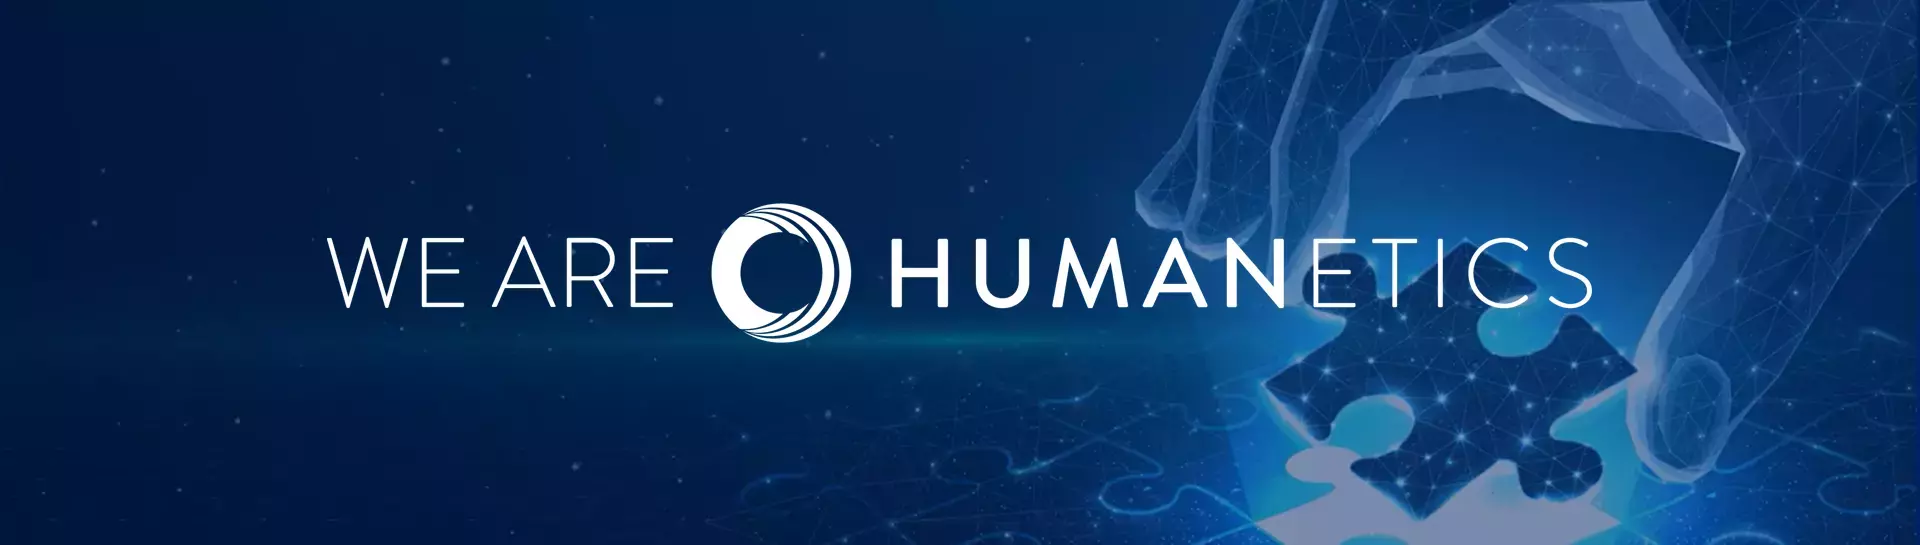 We Are Humanetics